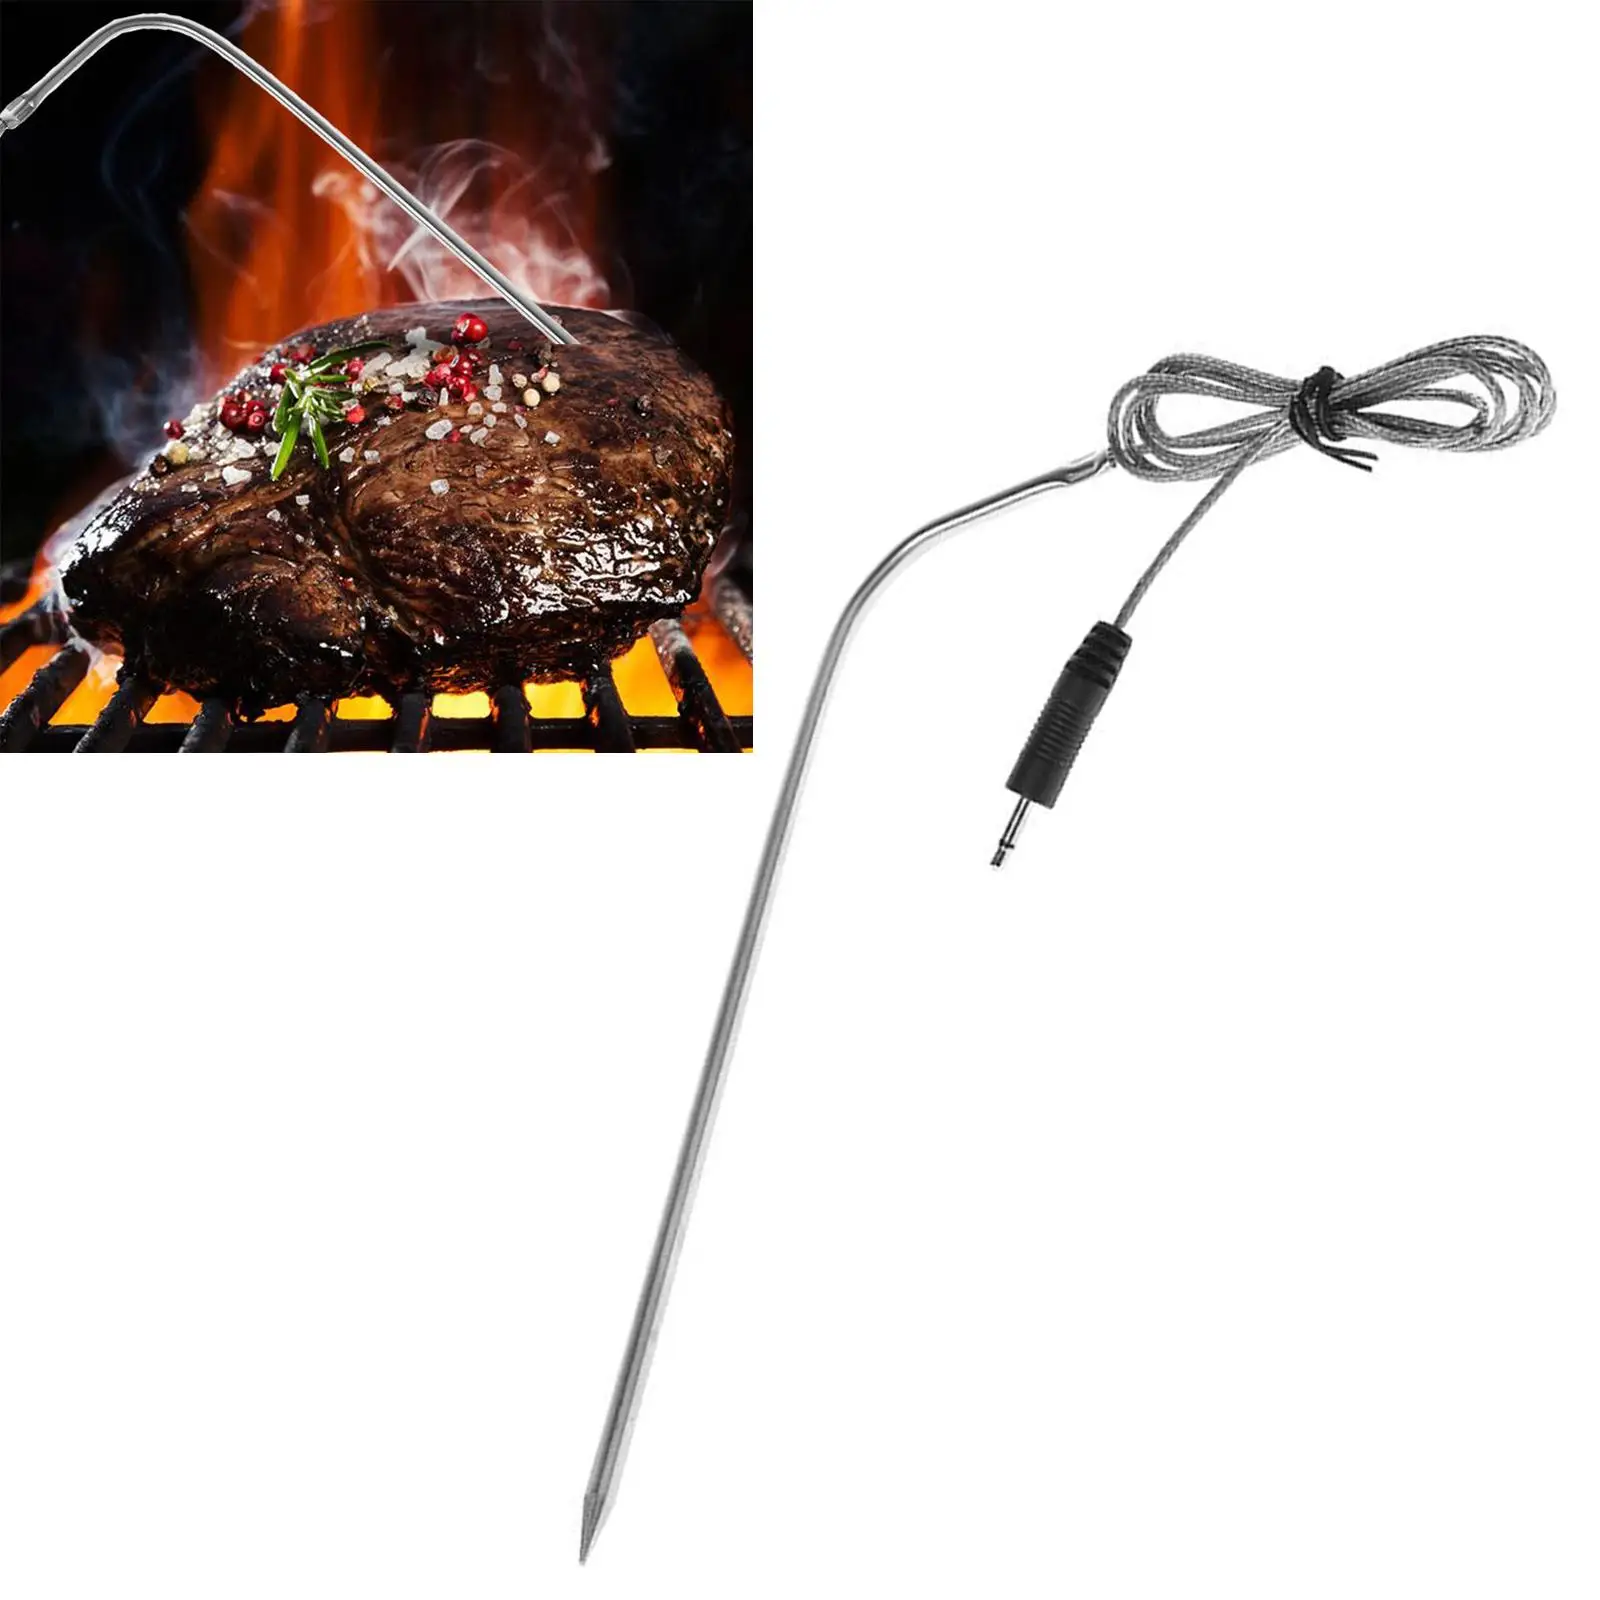 Metal Probe Reliable Durable Baking Supplies for Thermometer Accessory Replace